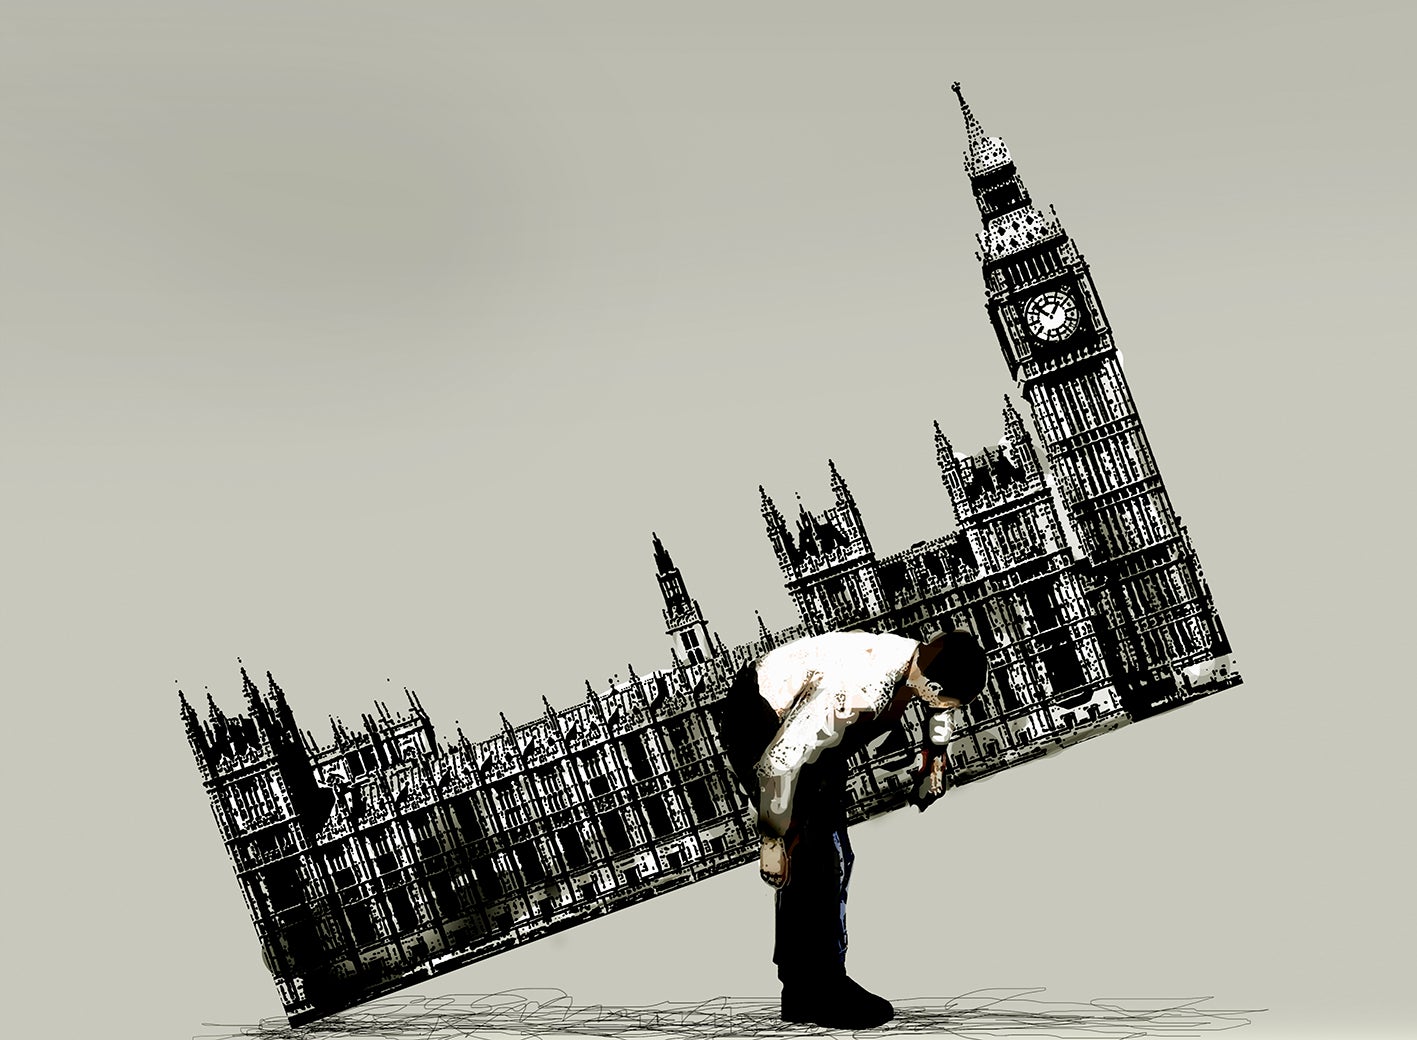 The Palace of Westminster is falling down, just like our political system